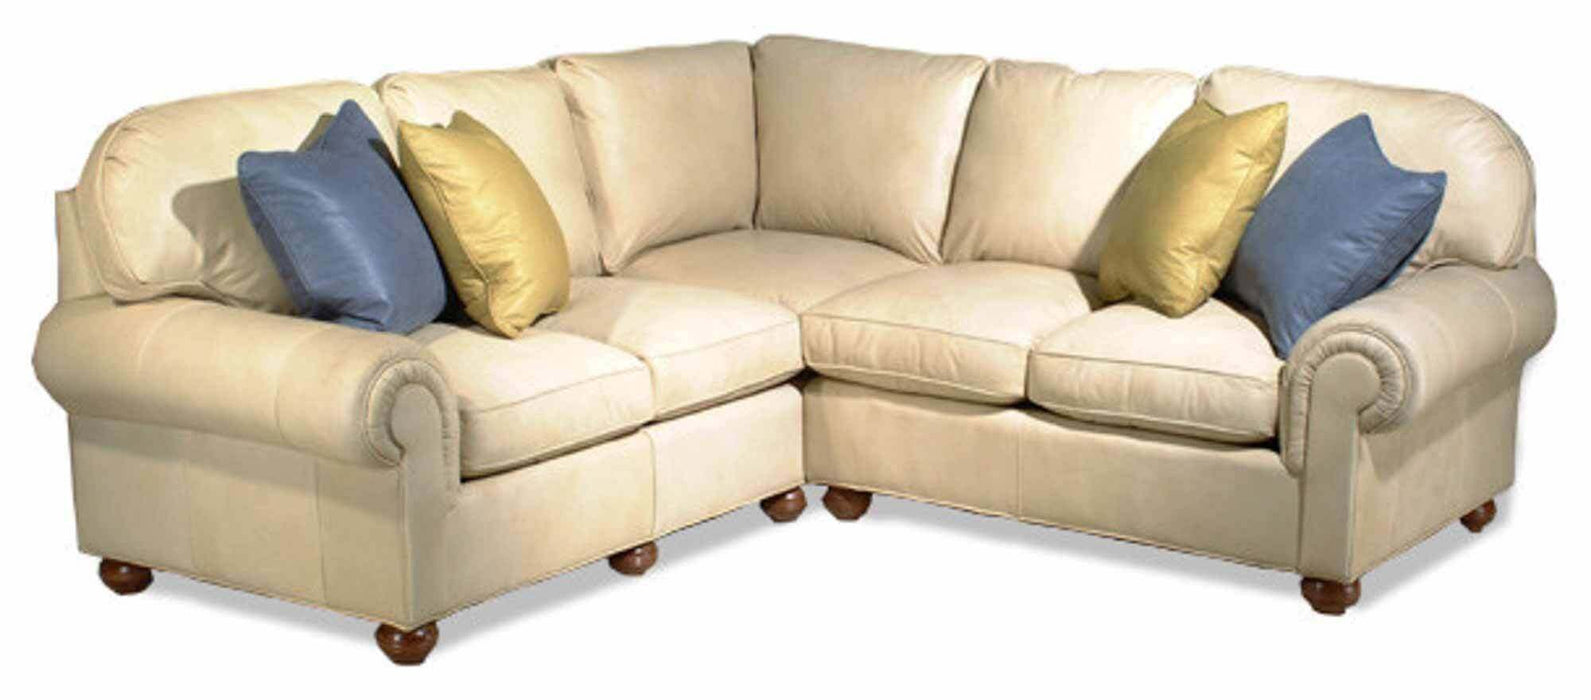 Senneca Leather Sectional